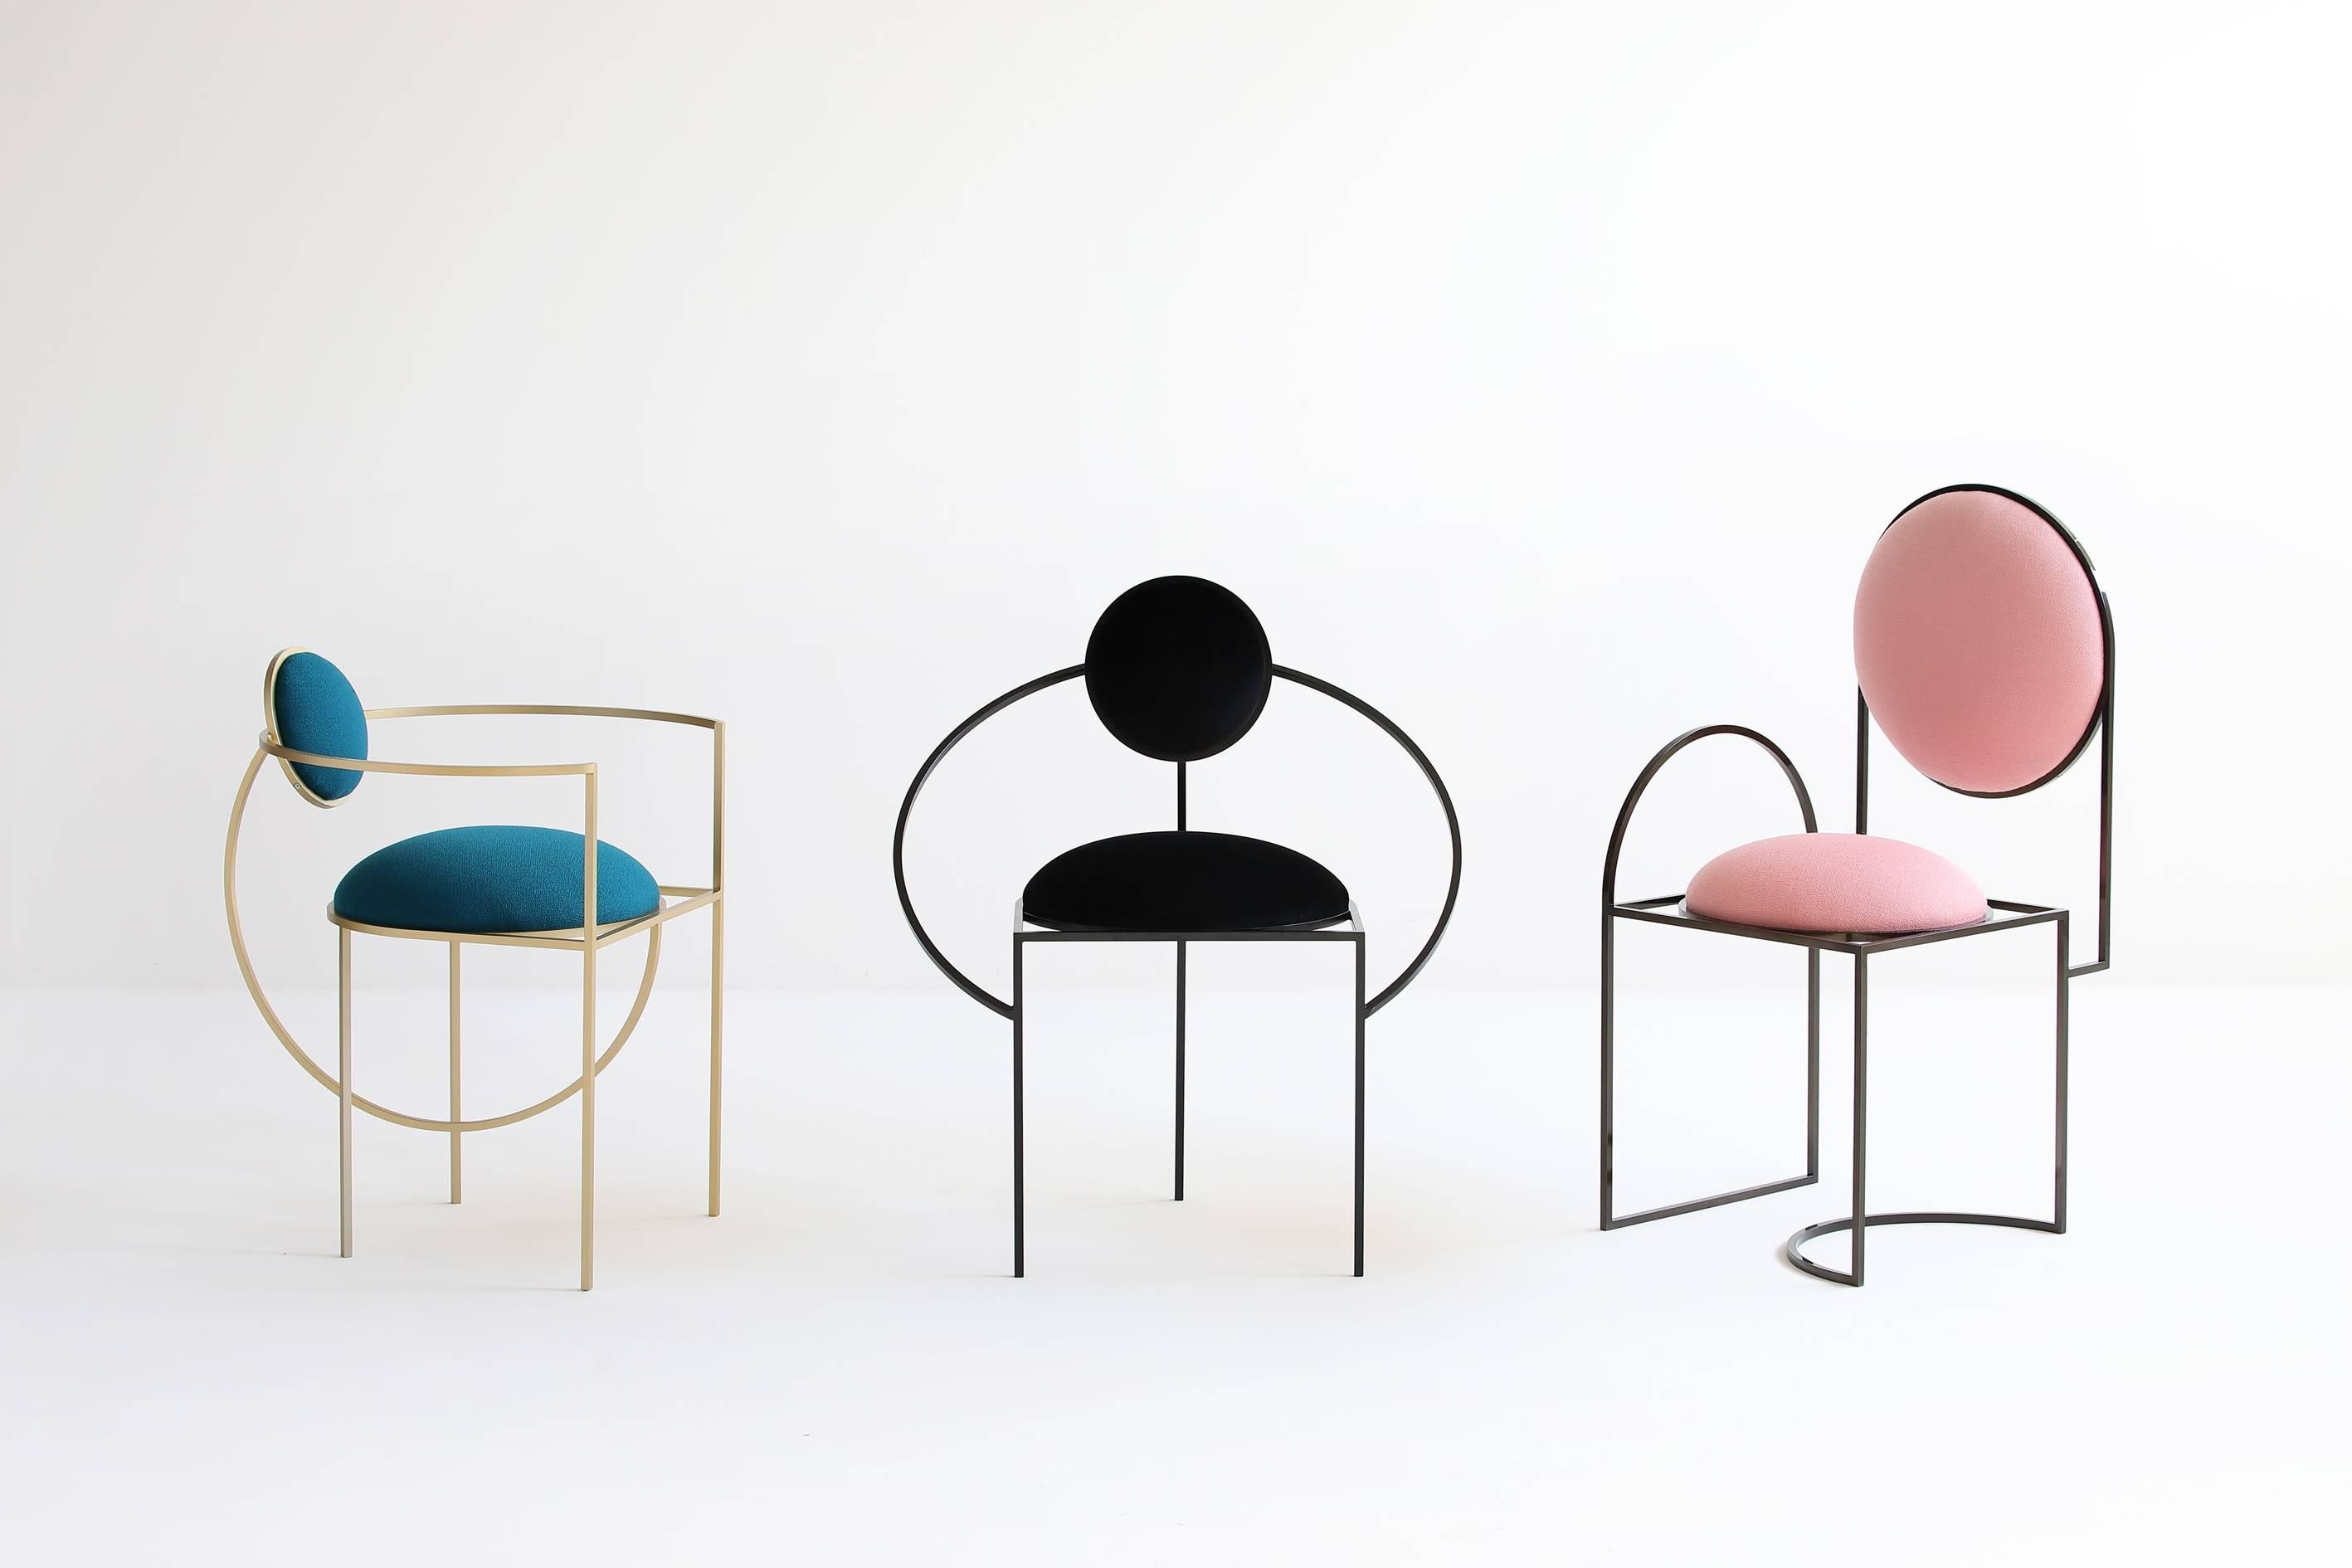 This is the first time that Bohinc explores a design favorite; the chair, produced by Matter of Stuff. 

In the collection, Lara Bohinc develops her stellar themes, finding inspiration in planetary and lunar orbits, whose curved trajectories drive